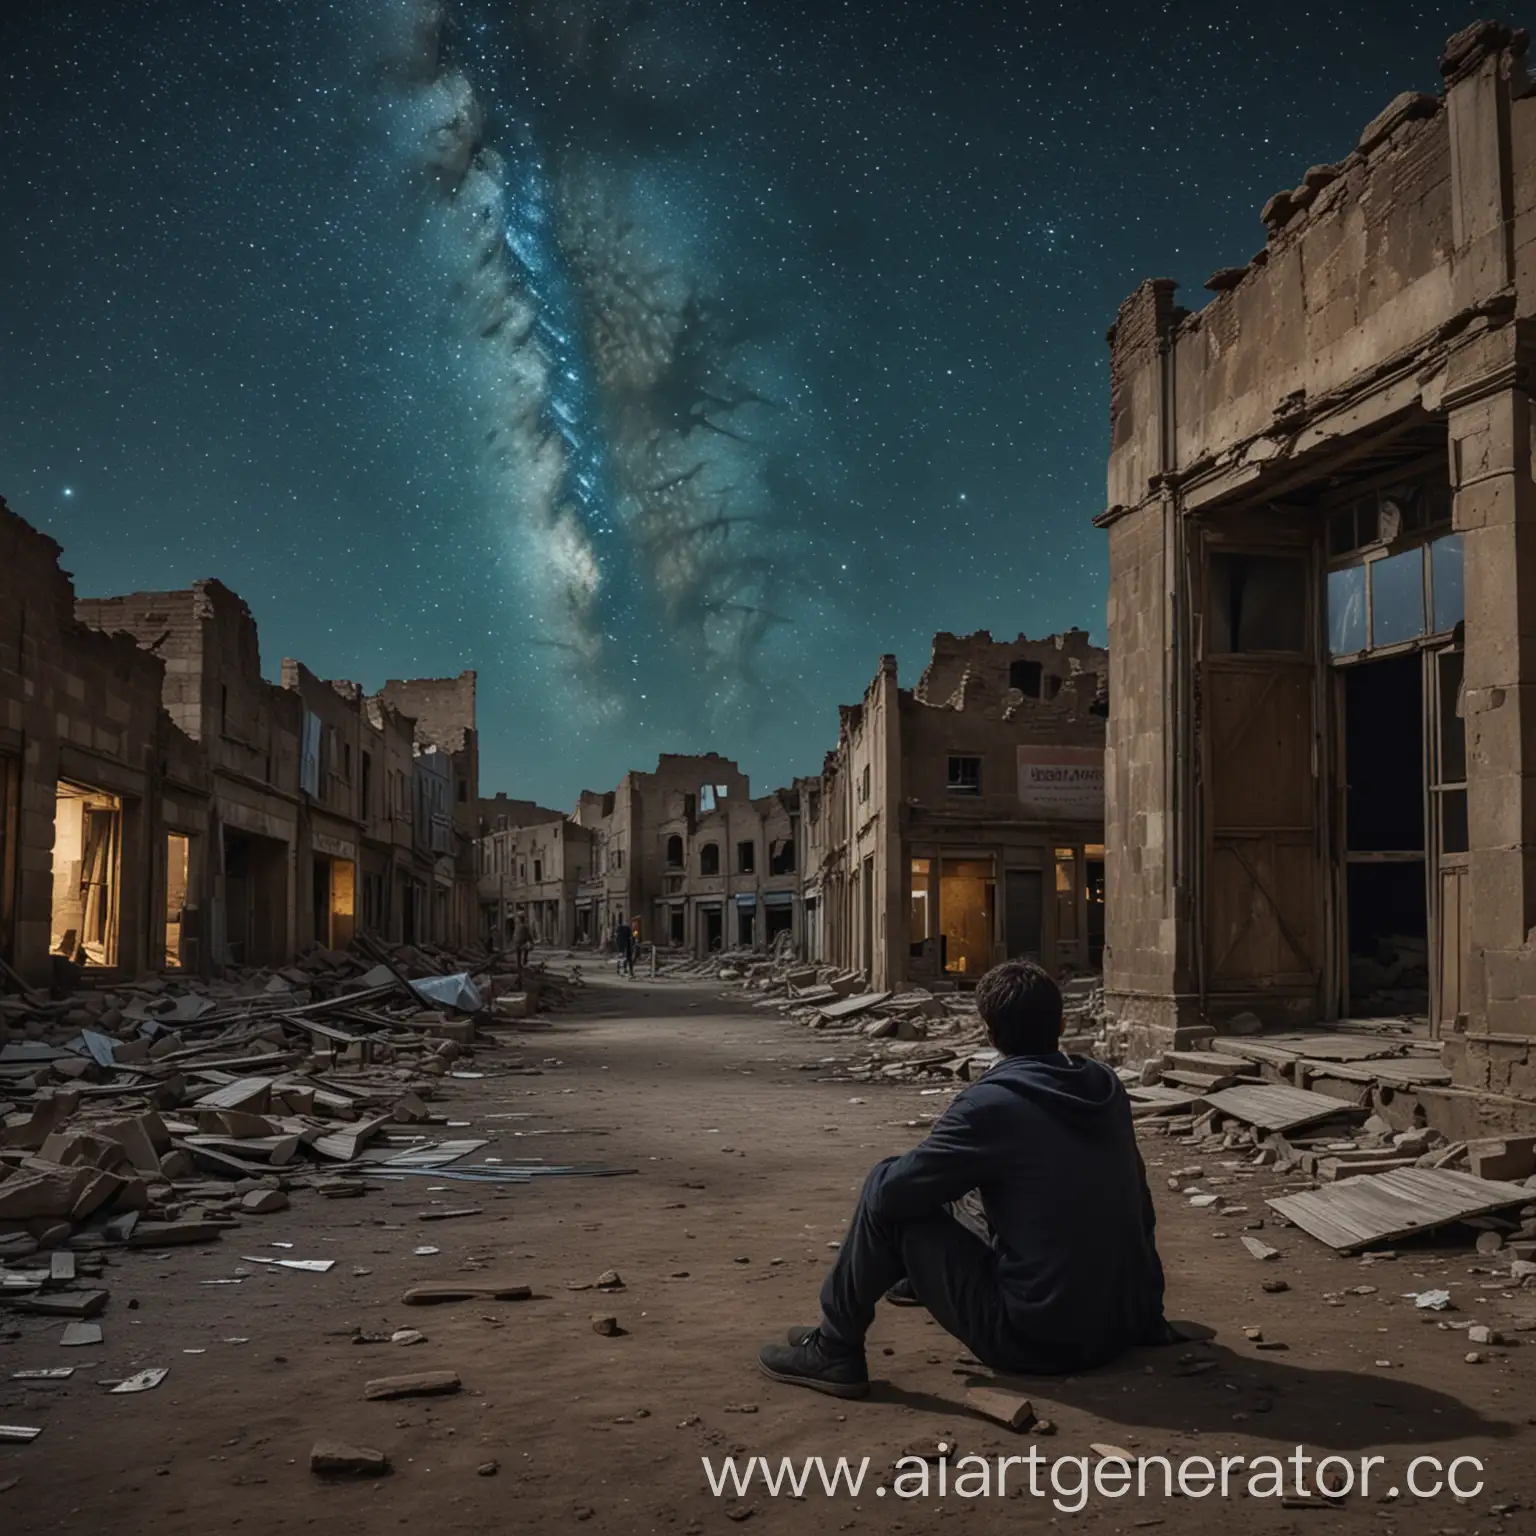 Lonely-Figure-Contemplating-Amidst-Distant-Ruined-City-Under-Starry-Sky